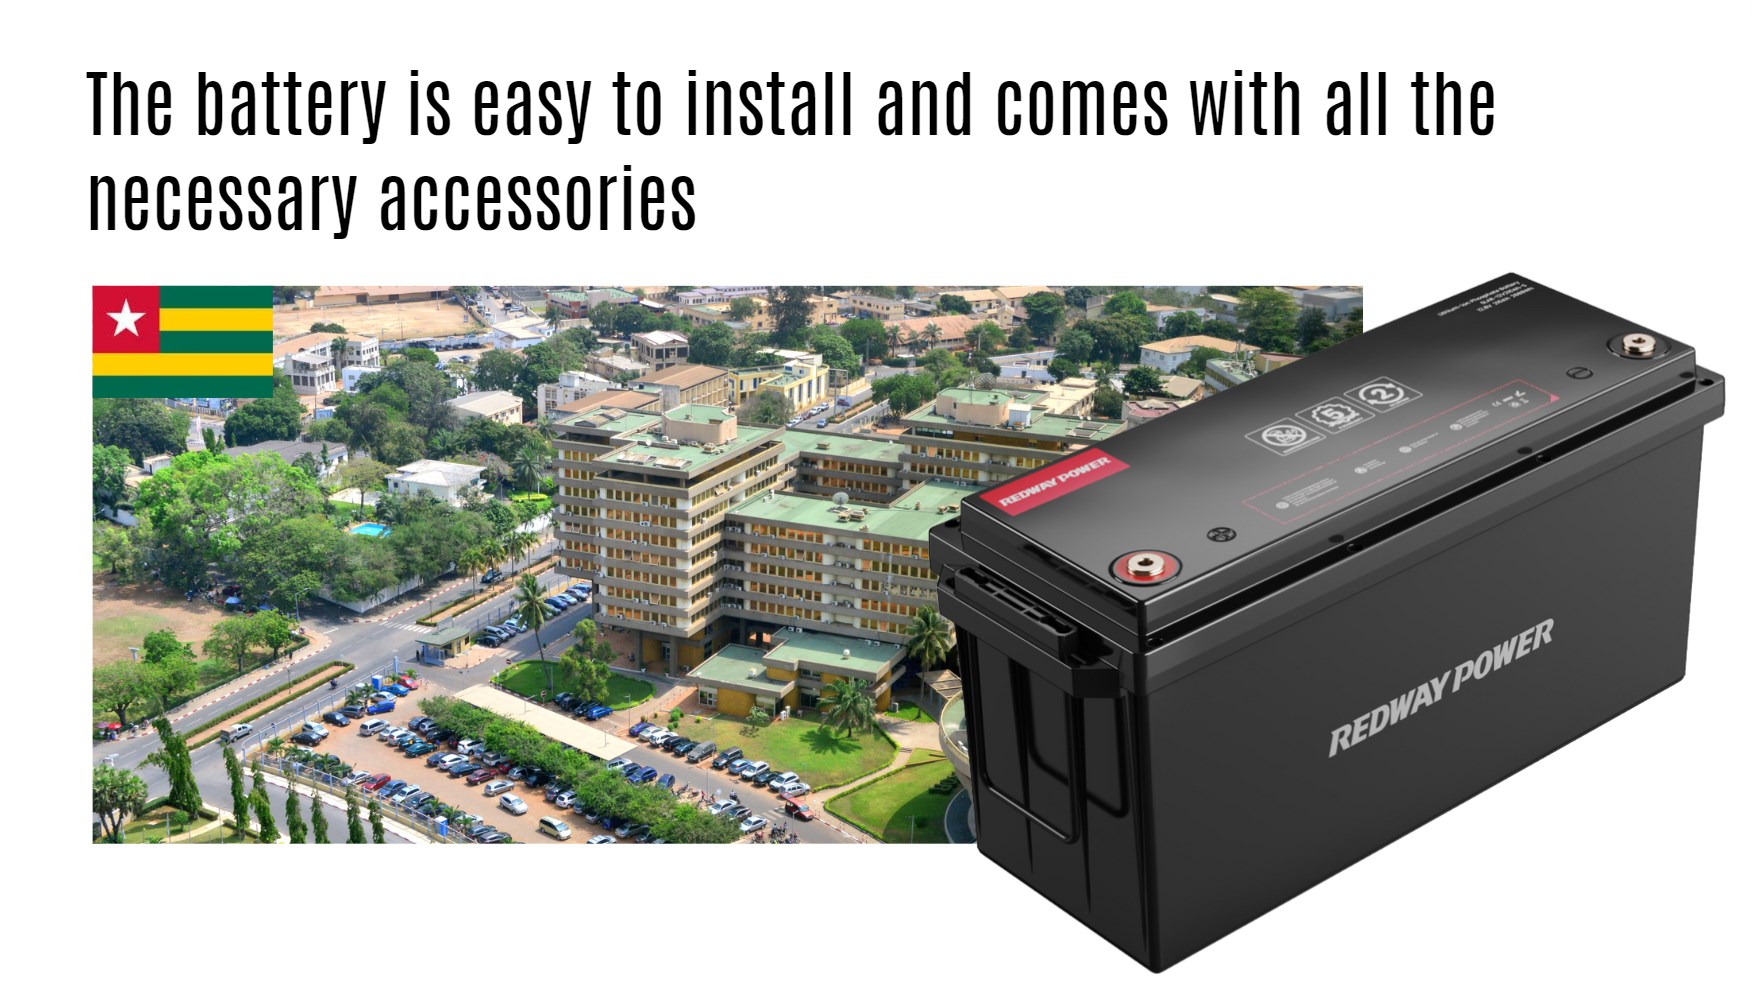 The battery is easy to install and comes with all the necessary accessories